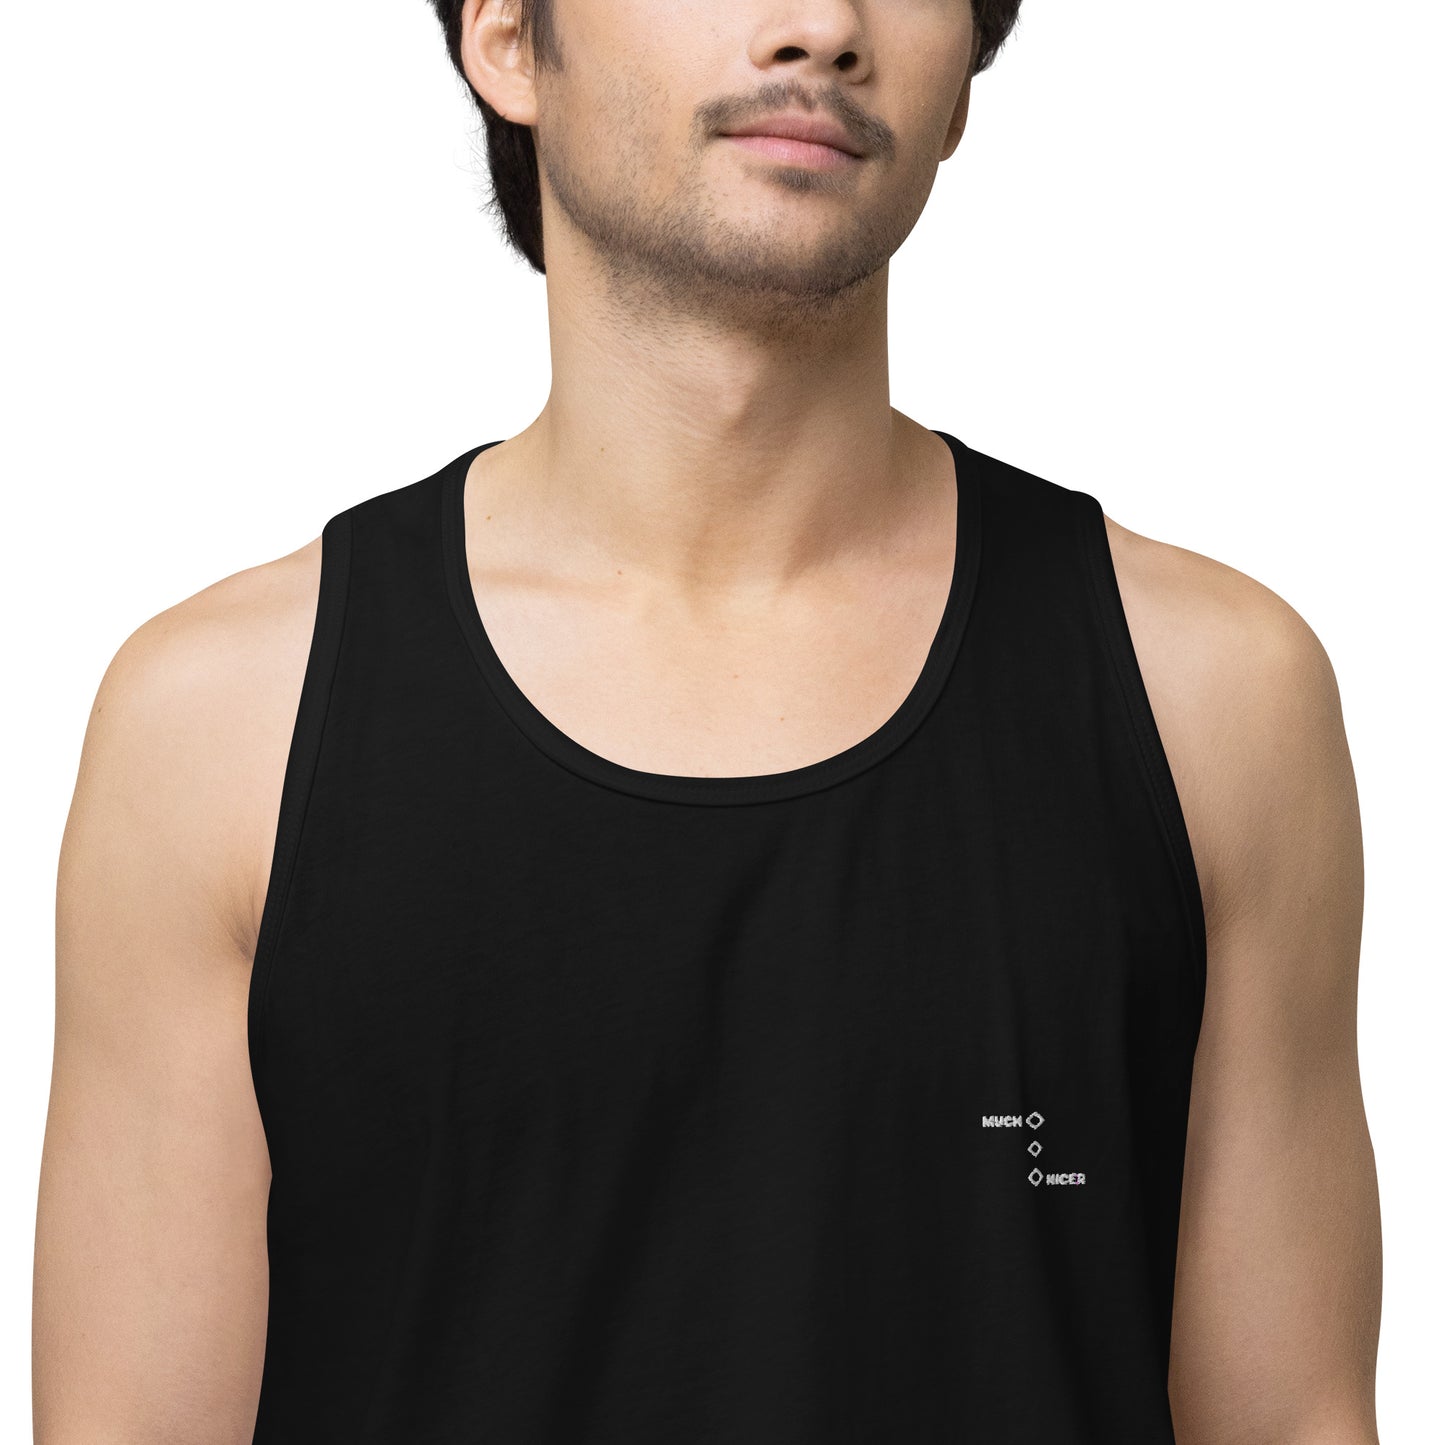 Embroidered and printed tank top - MUCH NICER